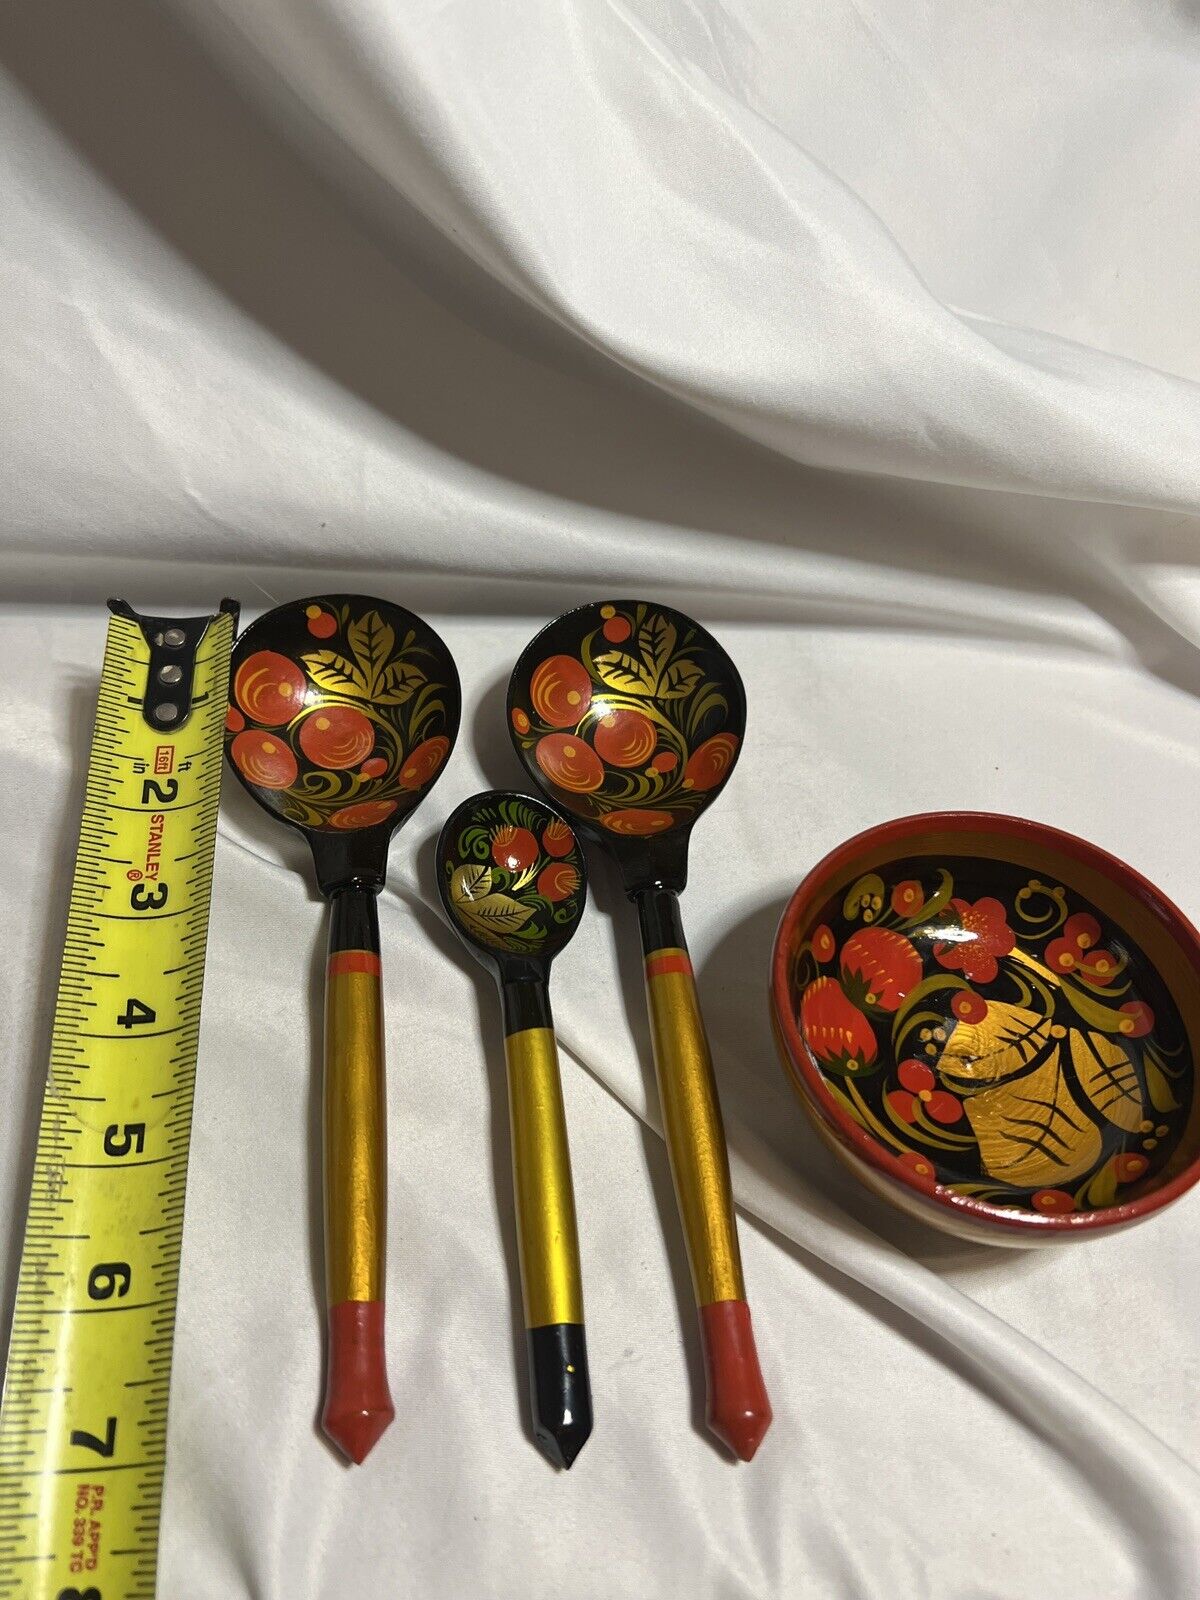 Set of 3 spoons and 1 bowl Vintage Khokhloma Russian painted Lacquer